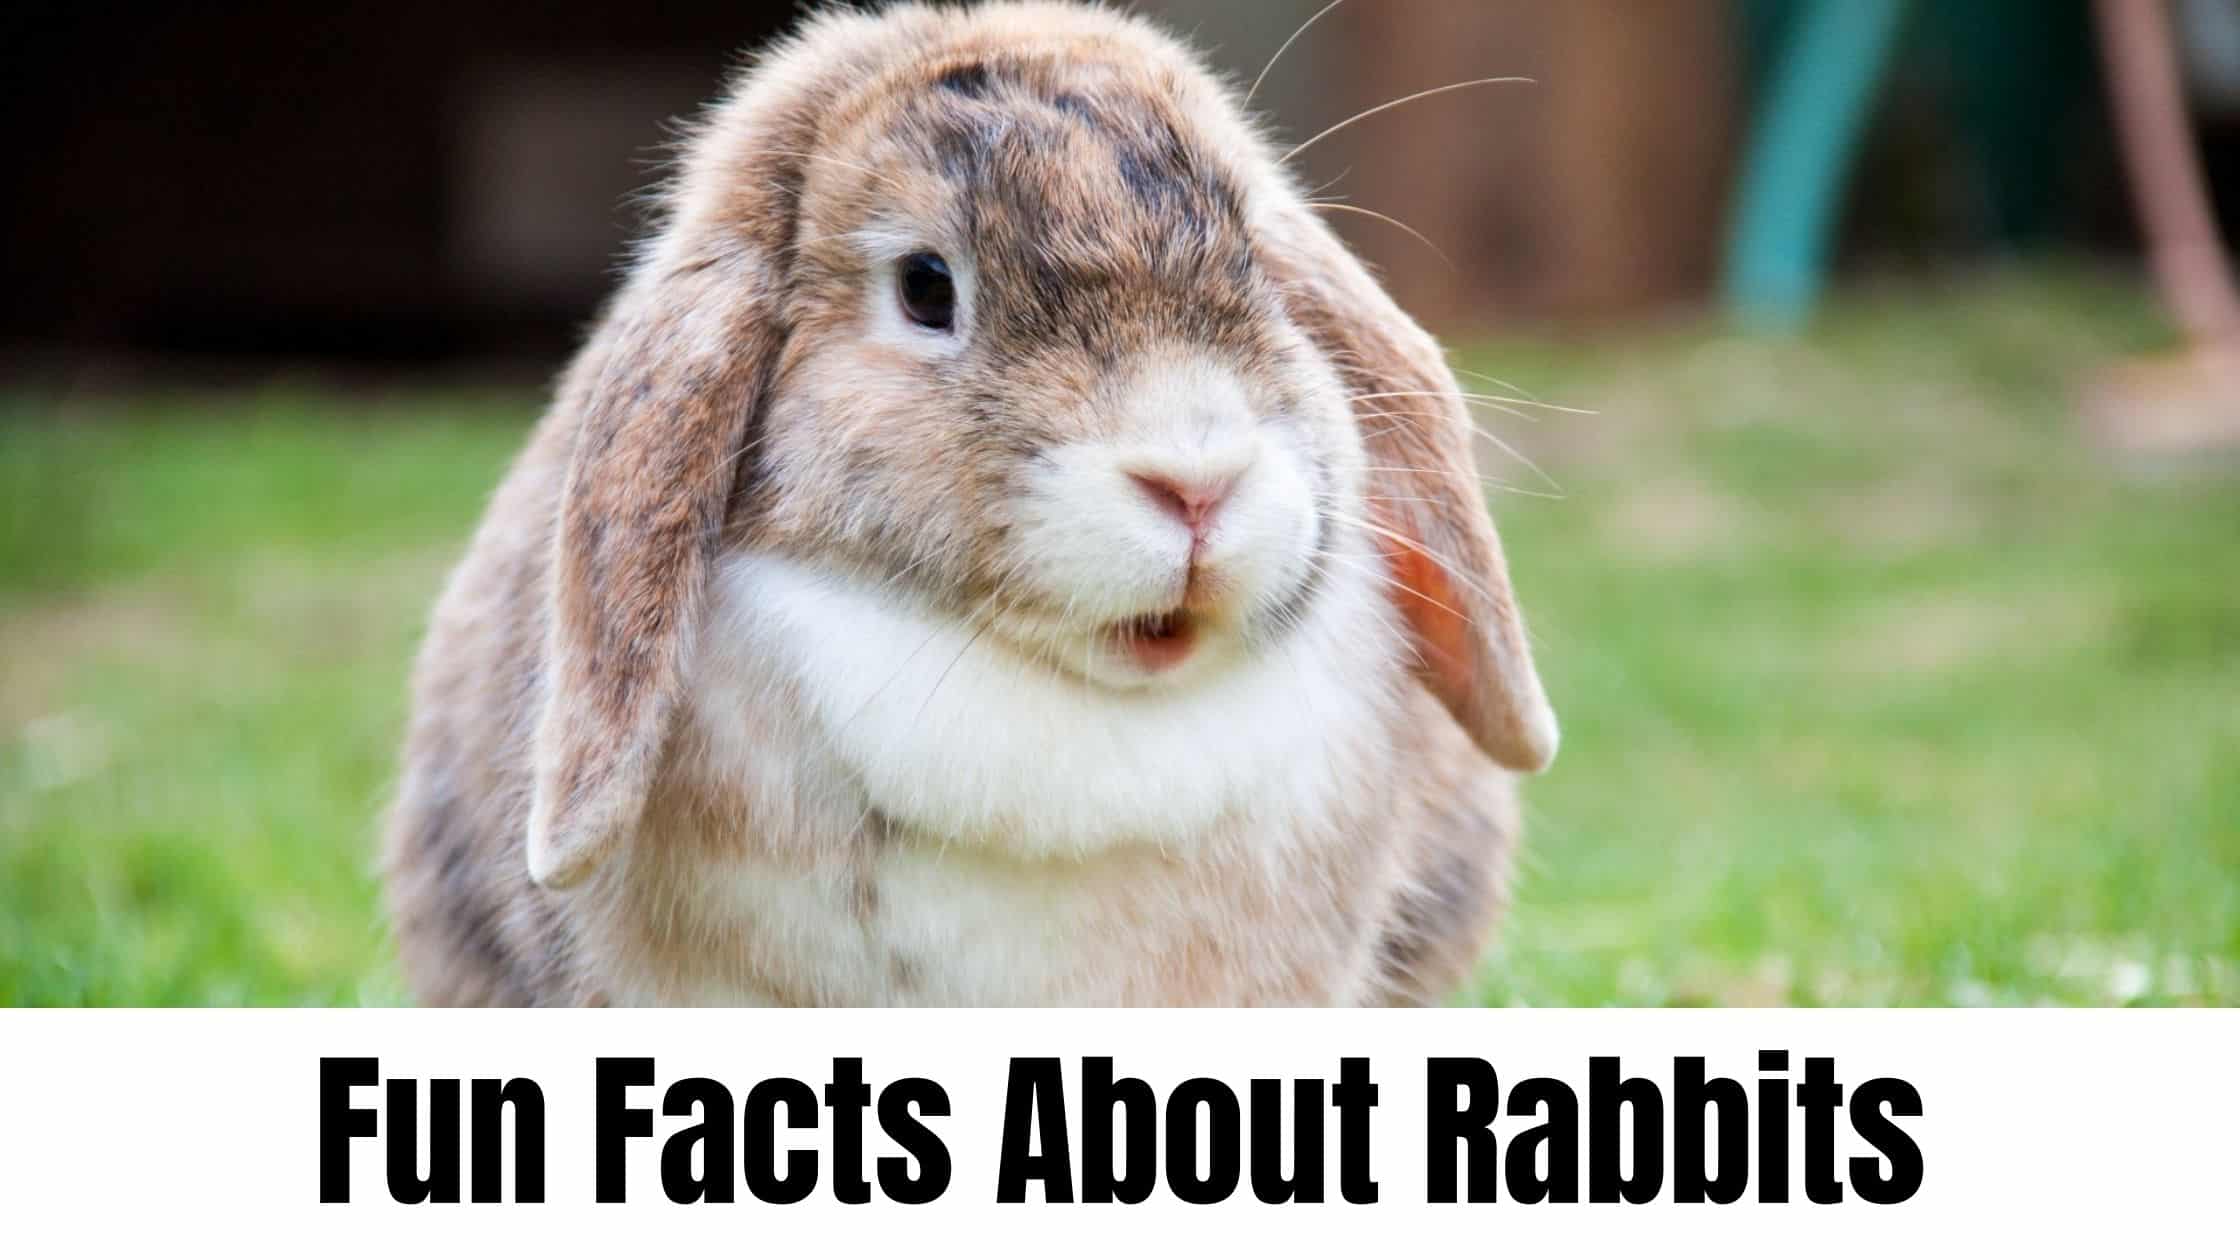 10 Fun Facts About Rabbits!